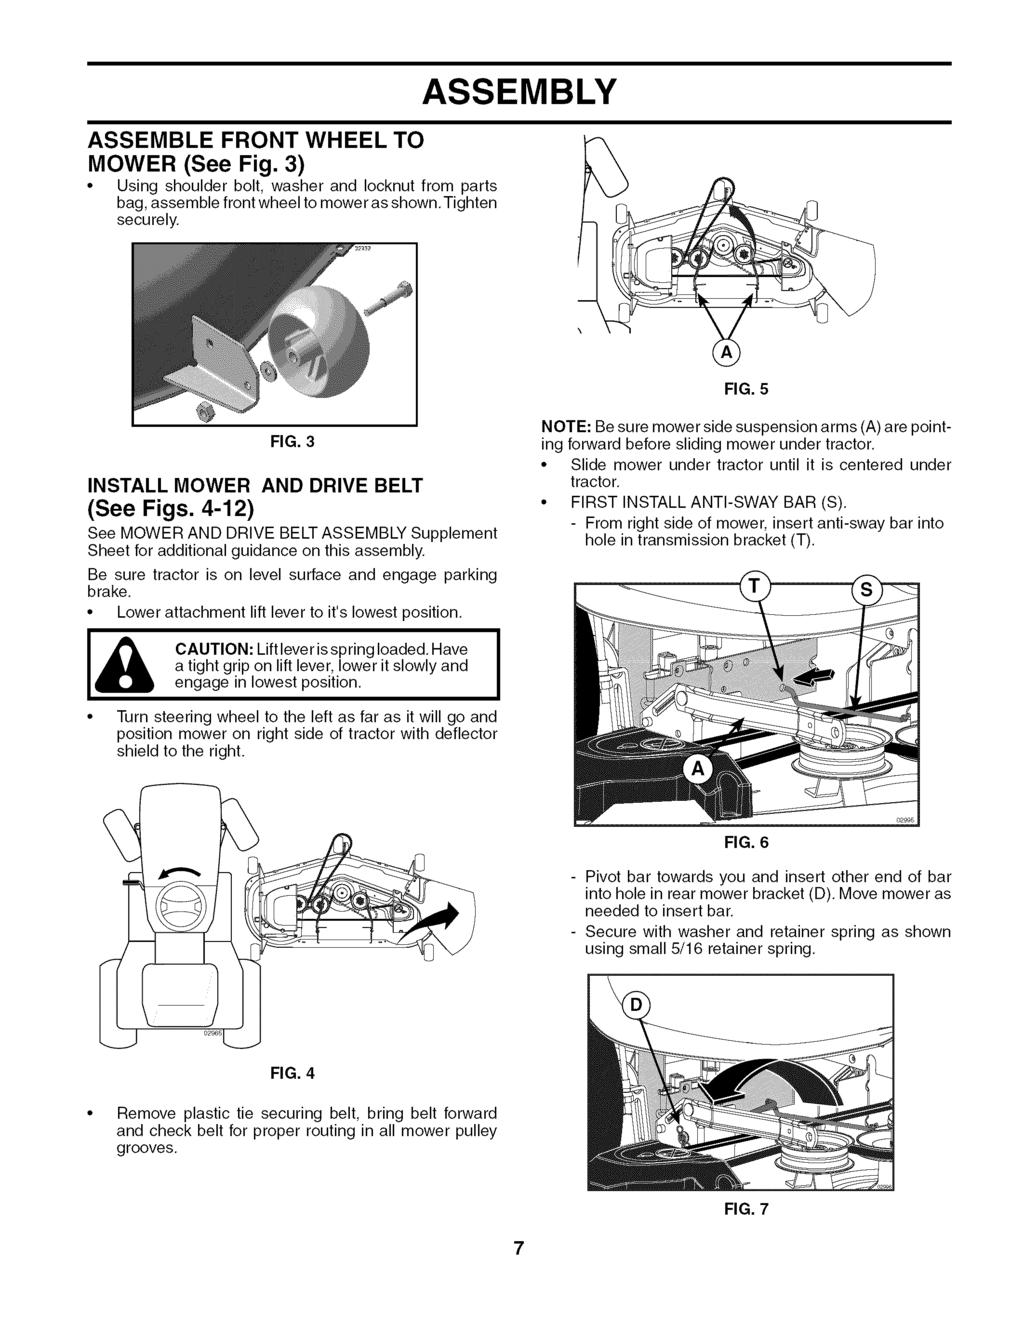 ASSEMBLE FRONT WHEEL TO MOWER (See Fig. 3) Using shoulder bolt, washer and Iocknut from parts bag, assemble front wheel to mower as shown,tighten securely. ASSEMBLY FIG. 5 FIG.